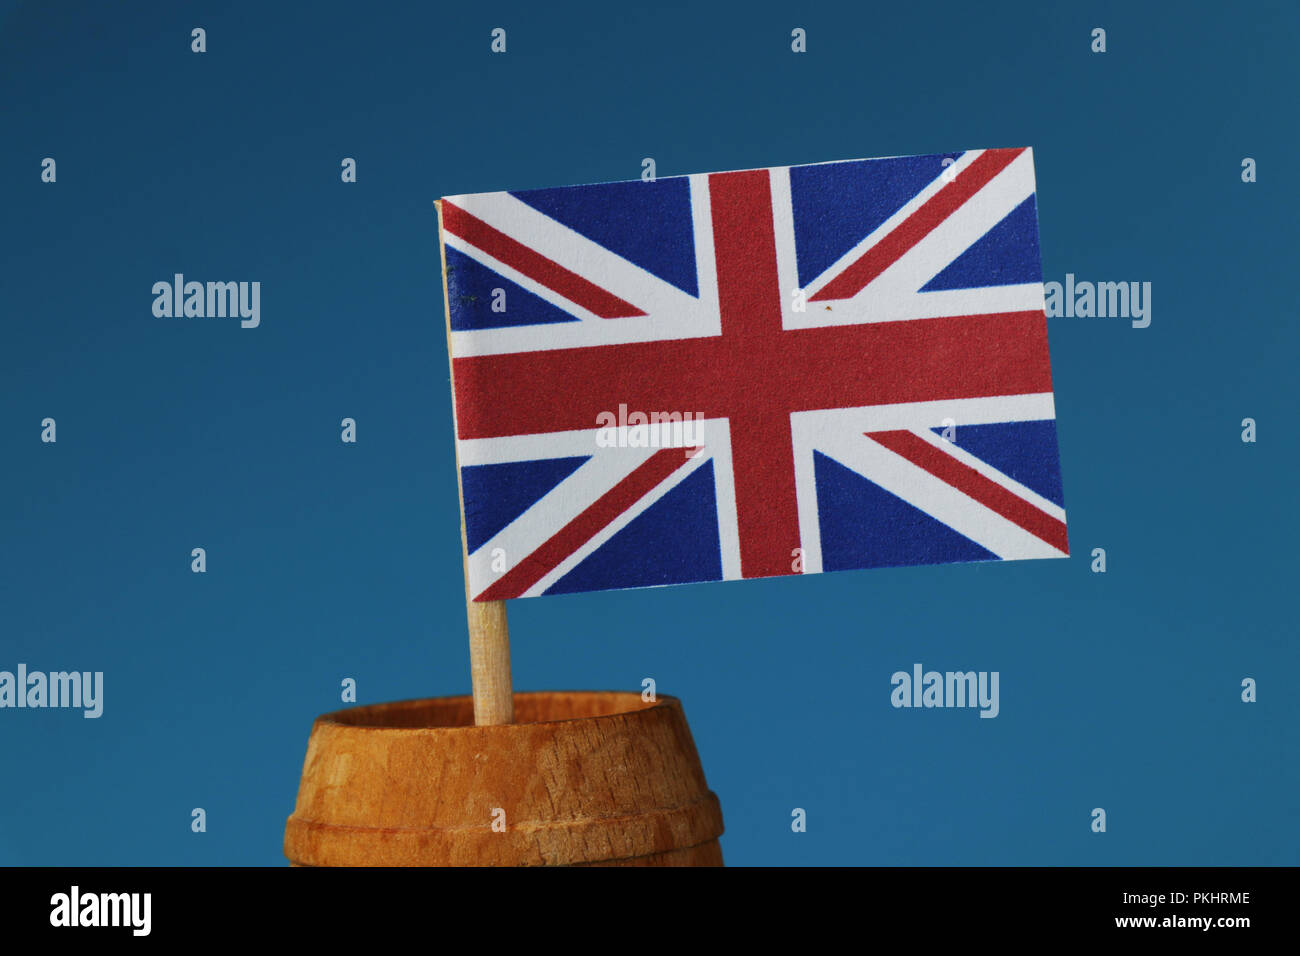 A detail on paper national flag of united kingdom on wooden stick in wooden barrel. Blue background Stock Photo